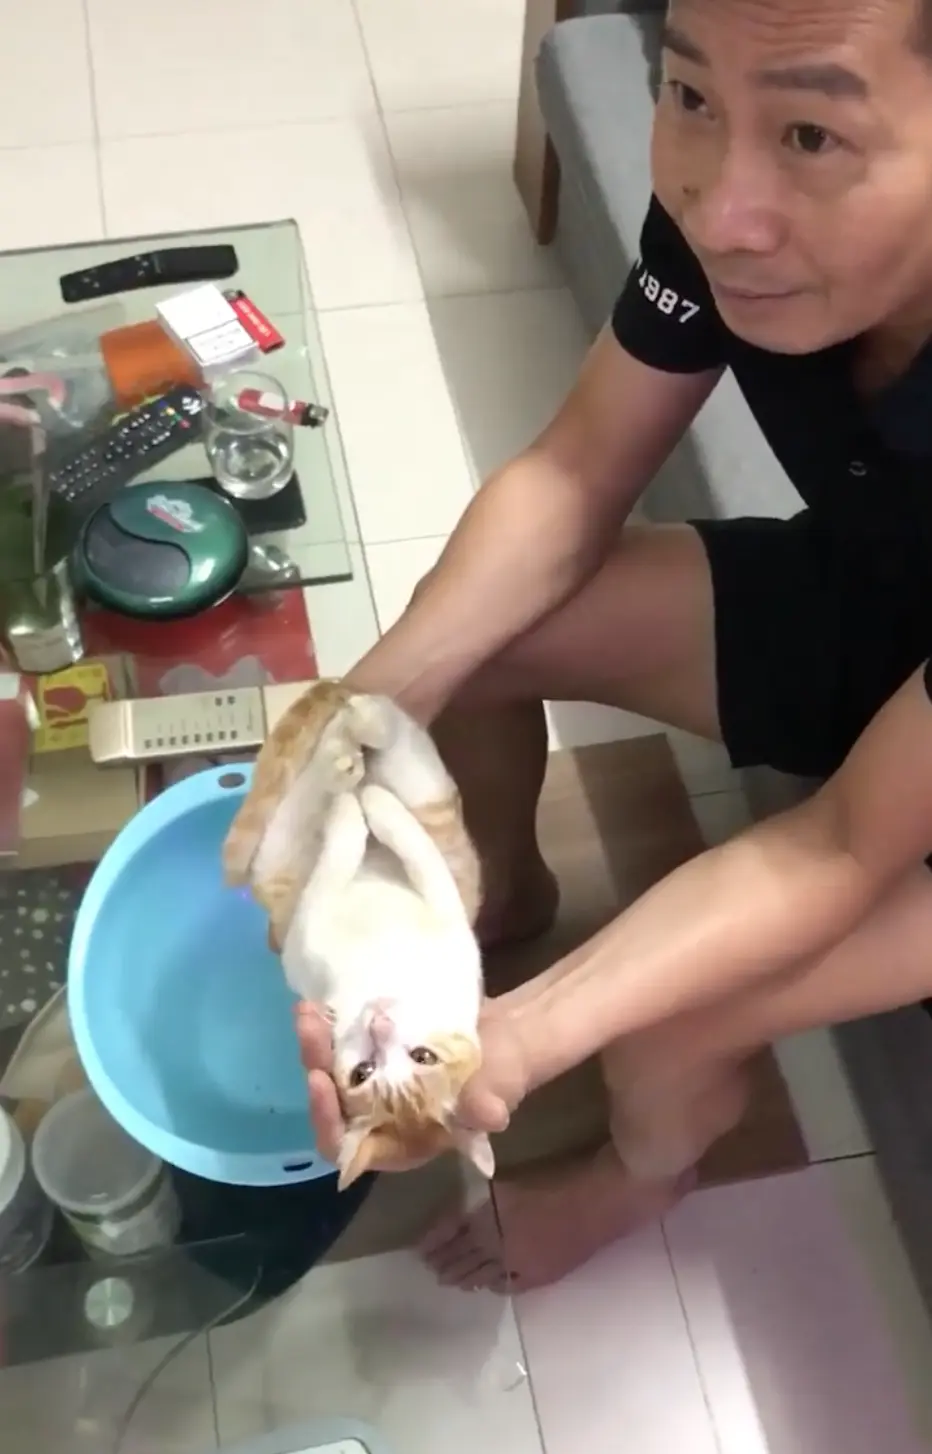 Vietnamese grandpa-to-be uses pet cat to show his son how to bathe a newborn baby | weirdkaya